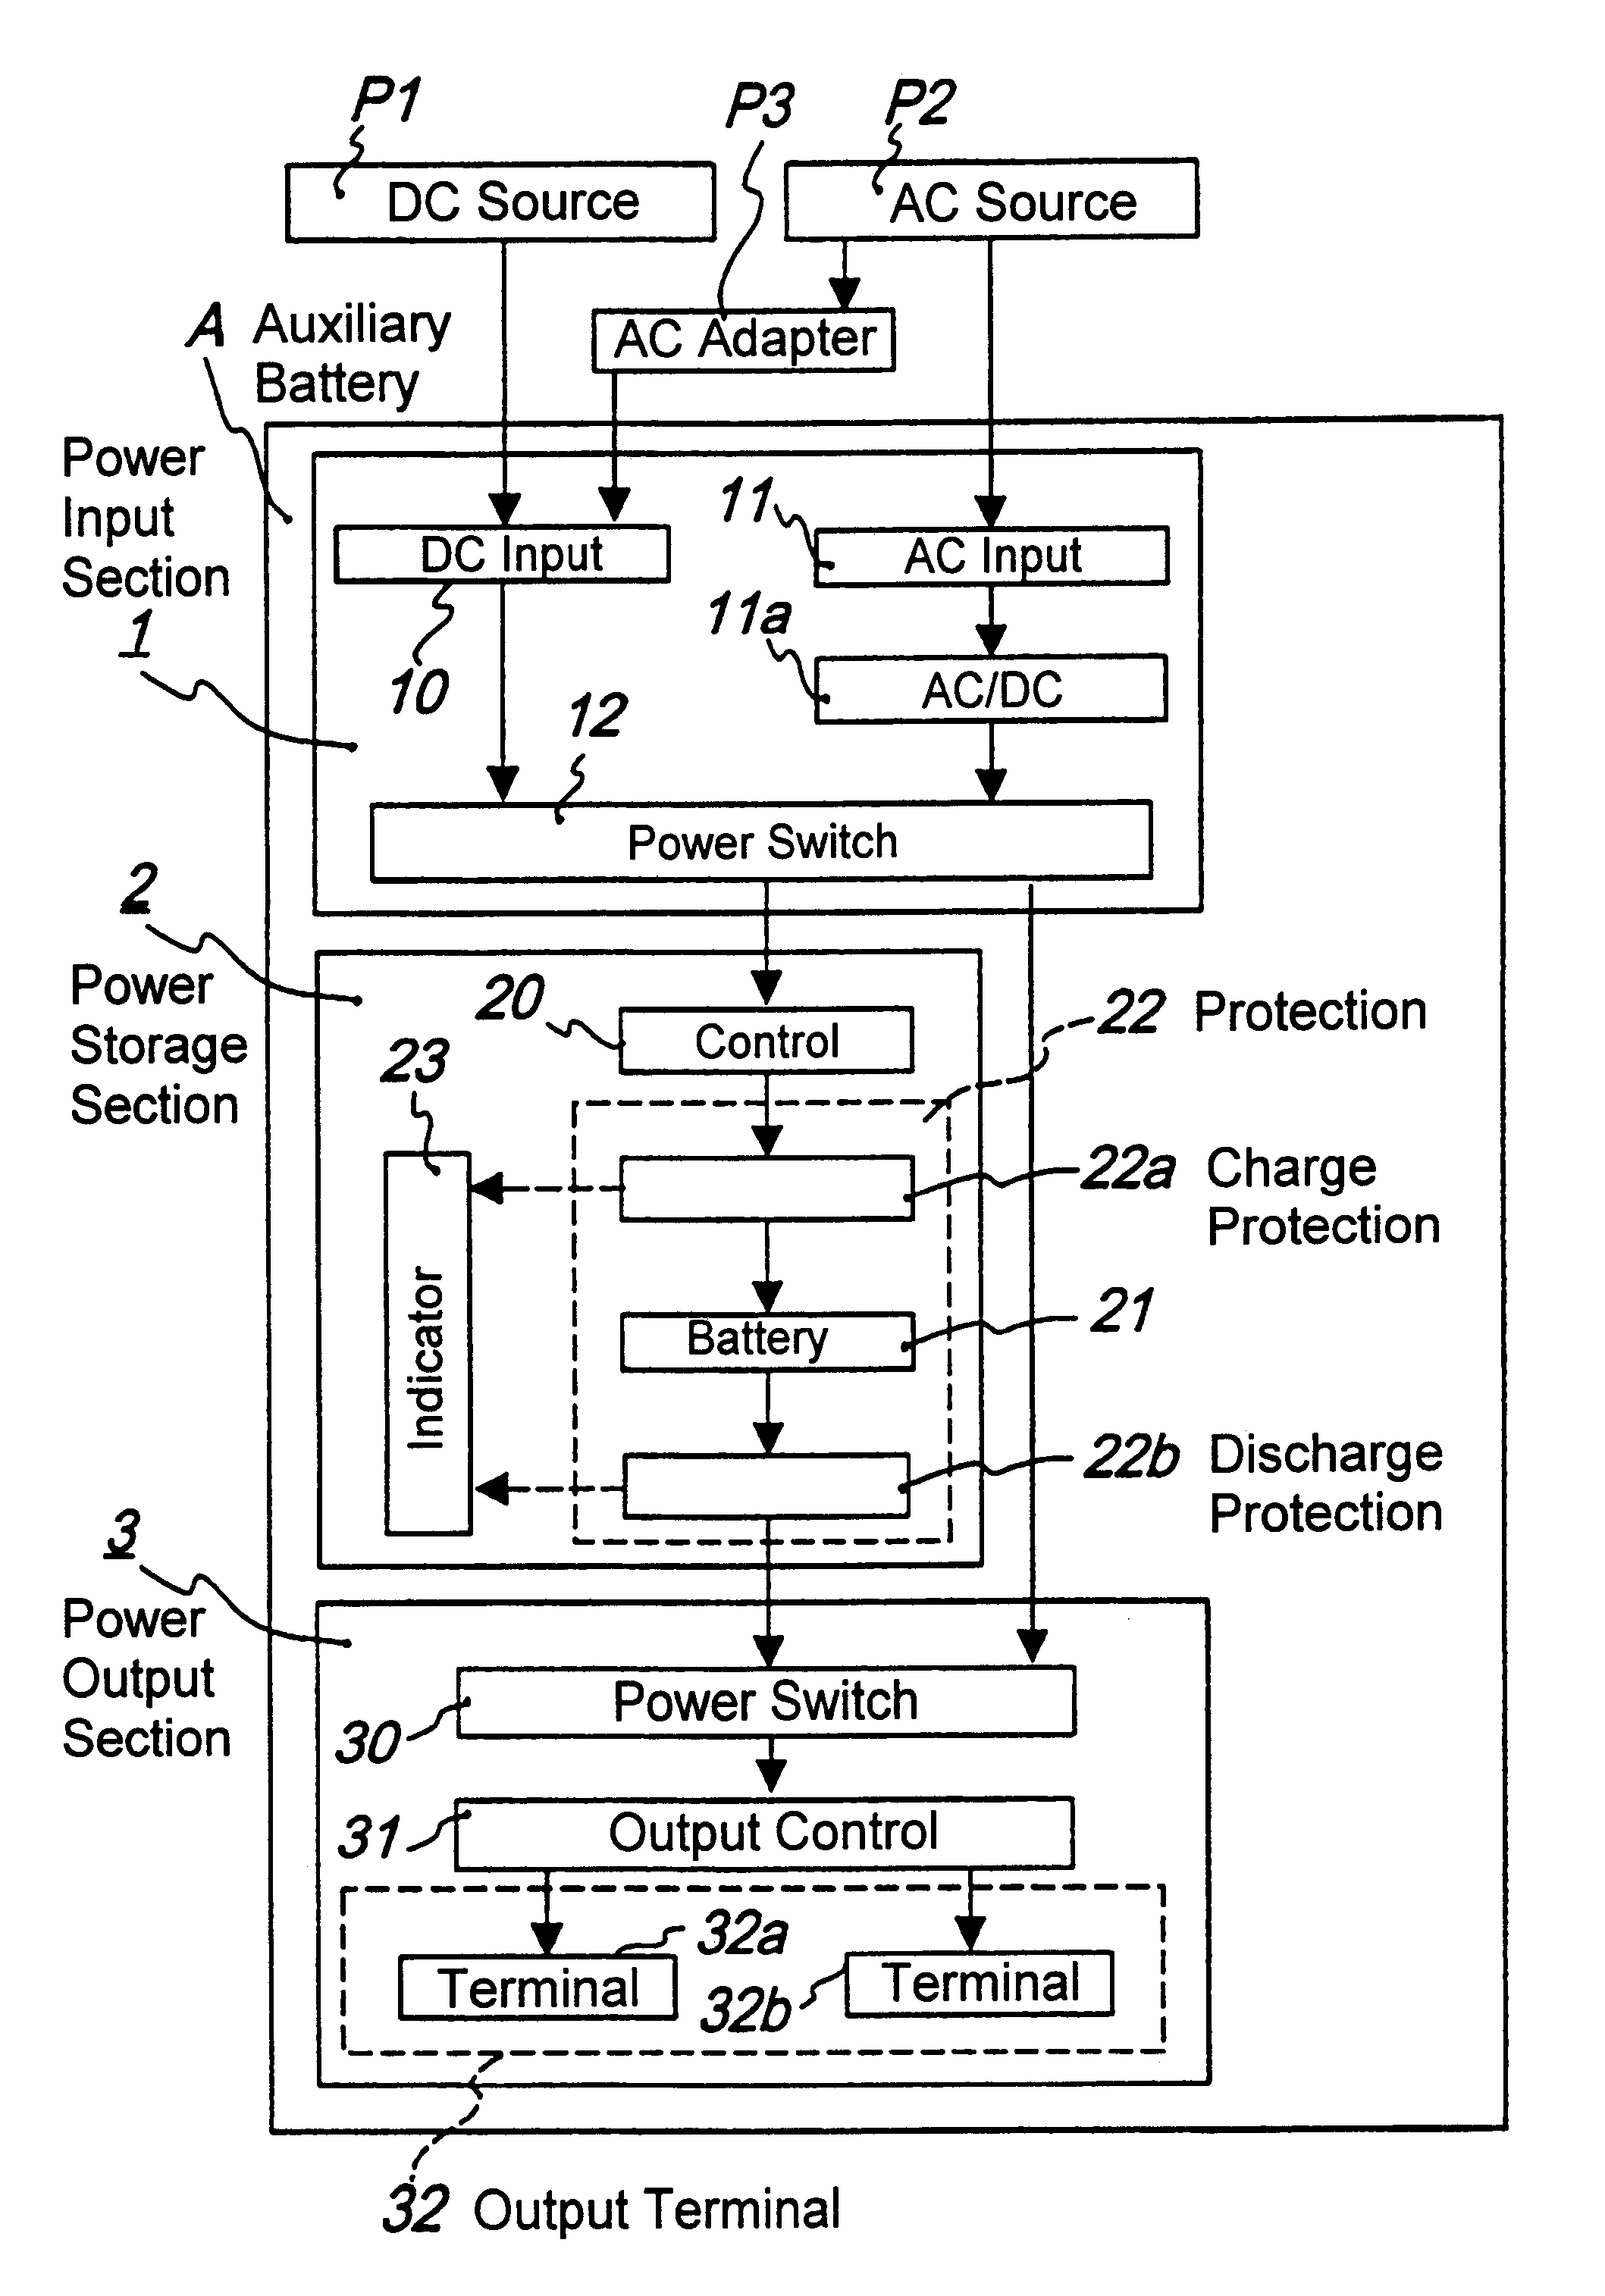 Auxiliary battery for portable devices